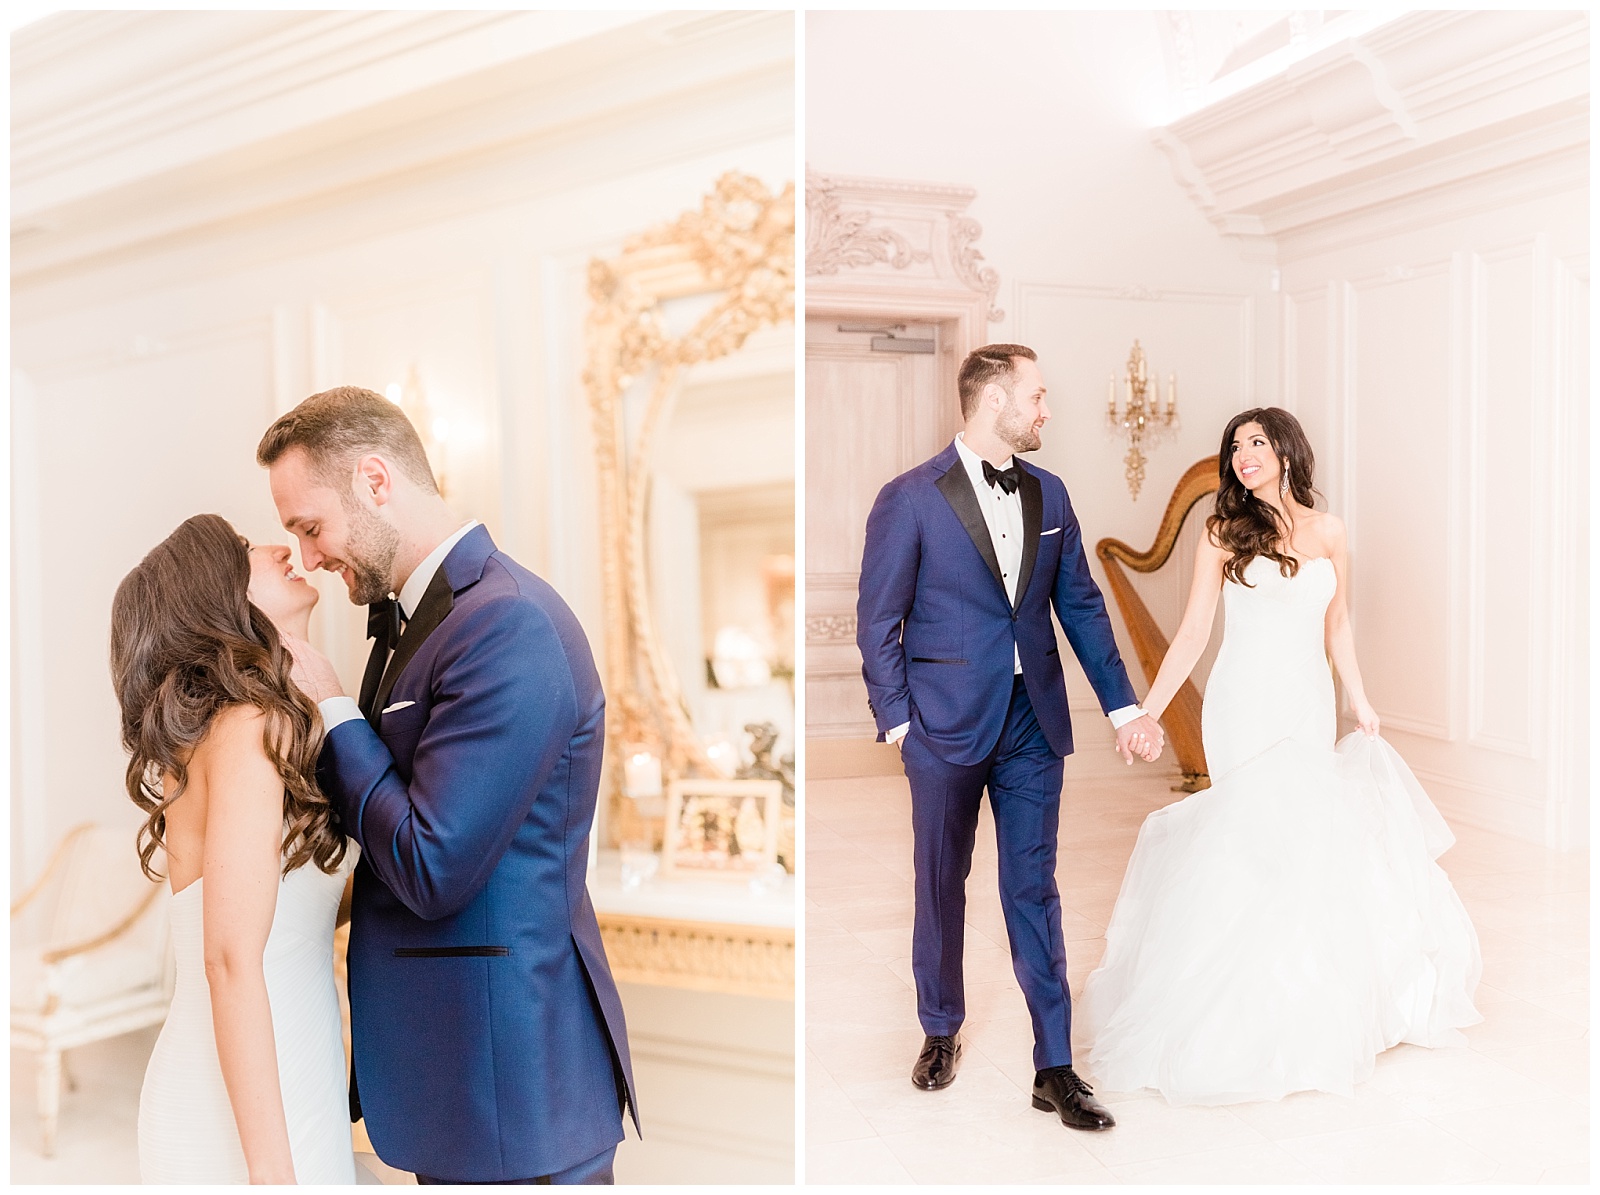 Park Chateau Wedding, Photographer, New Jersey, NJ, Winter, Bride and Groom Portraits, Light and Airy, Luxury wedding